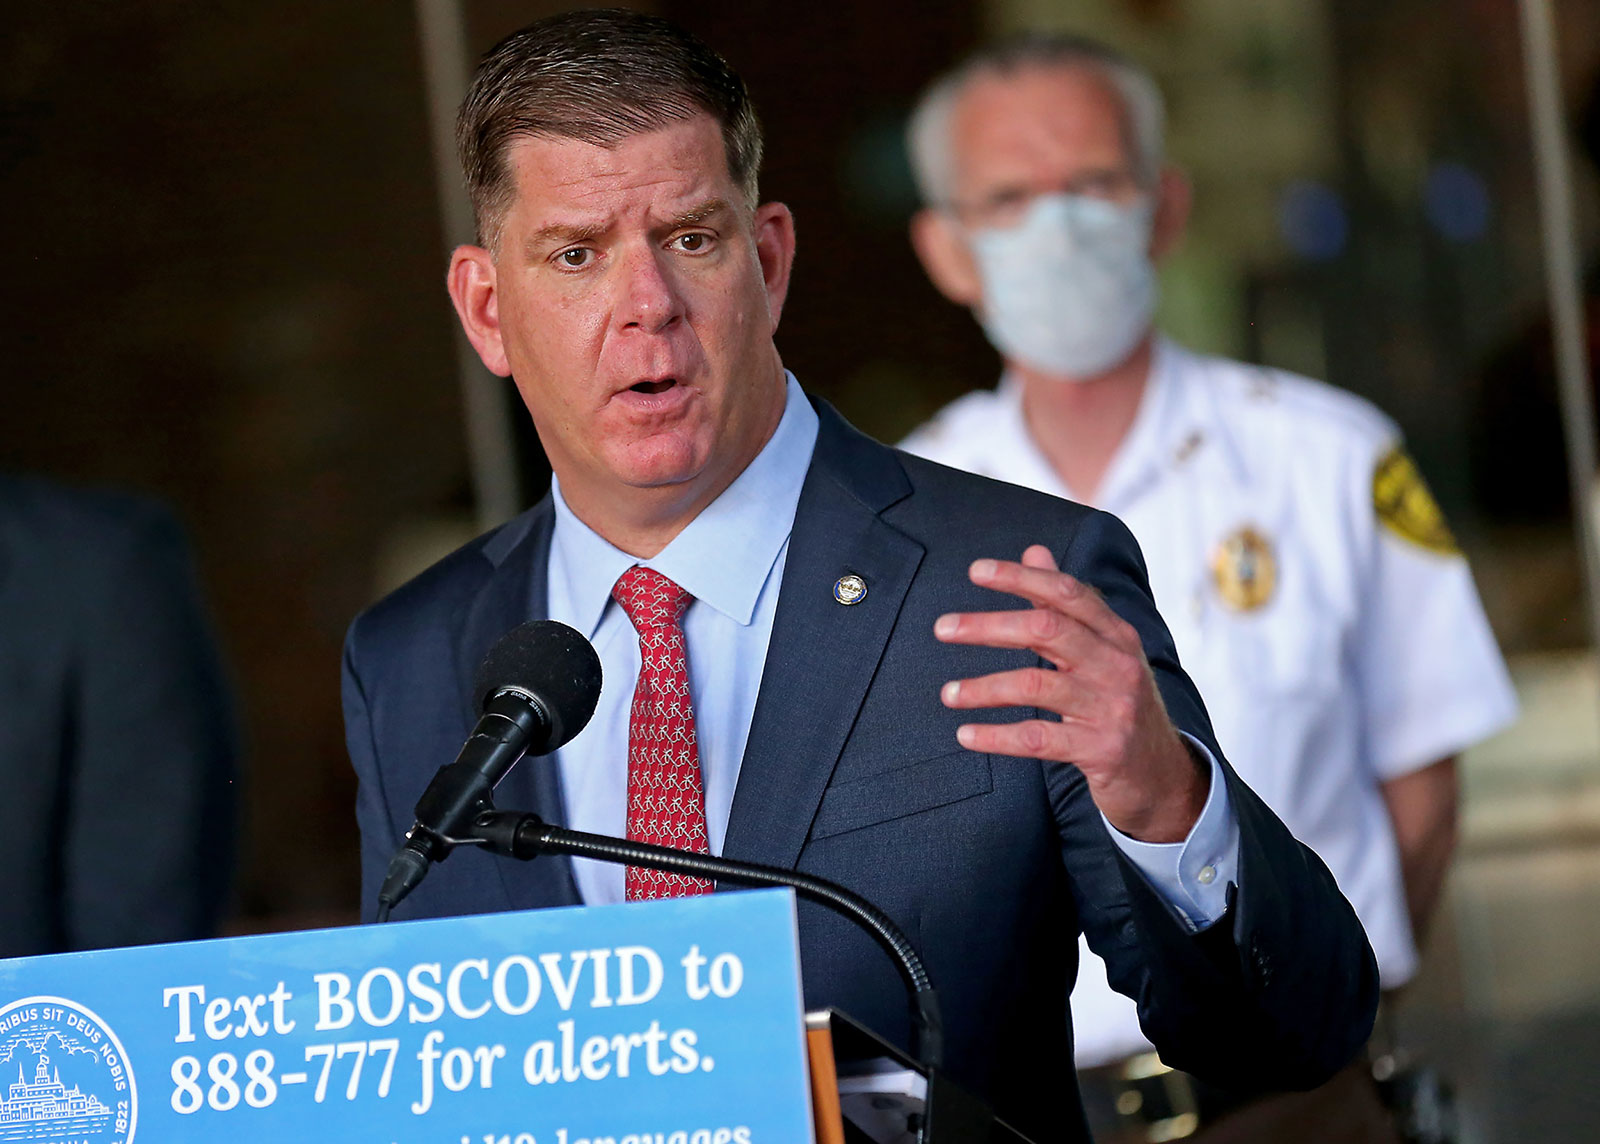 Boston Mayor Marty Walsh speaks at a press conference at Boston City Hall on July 2.